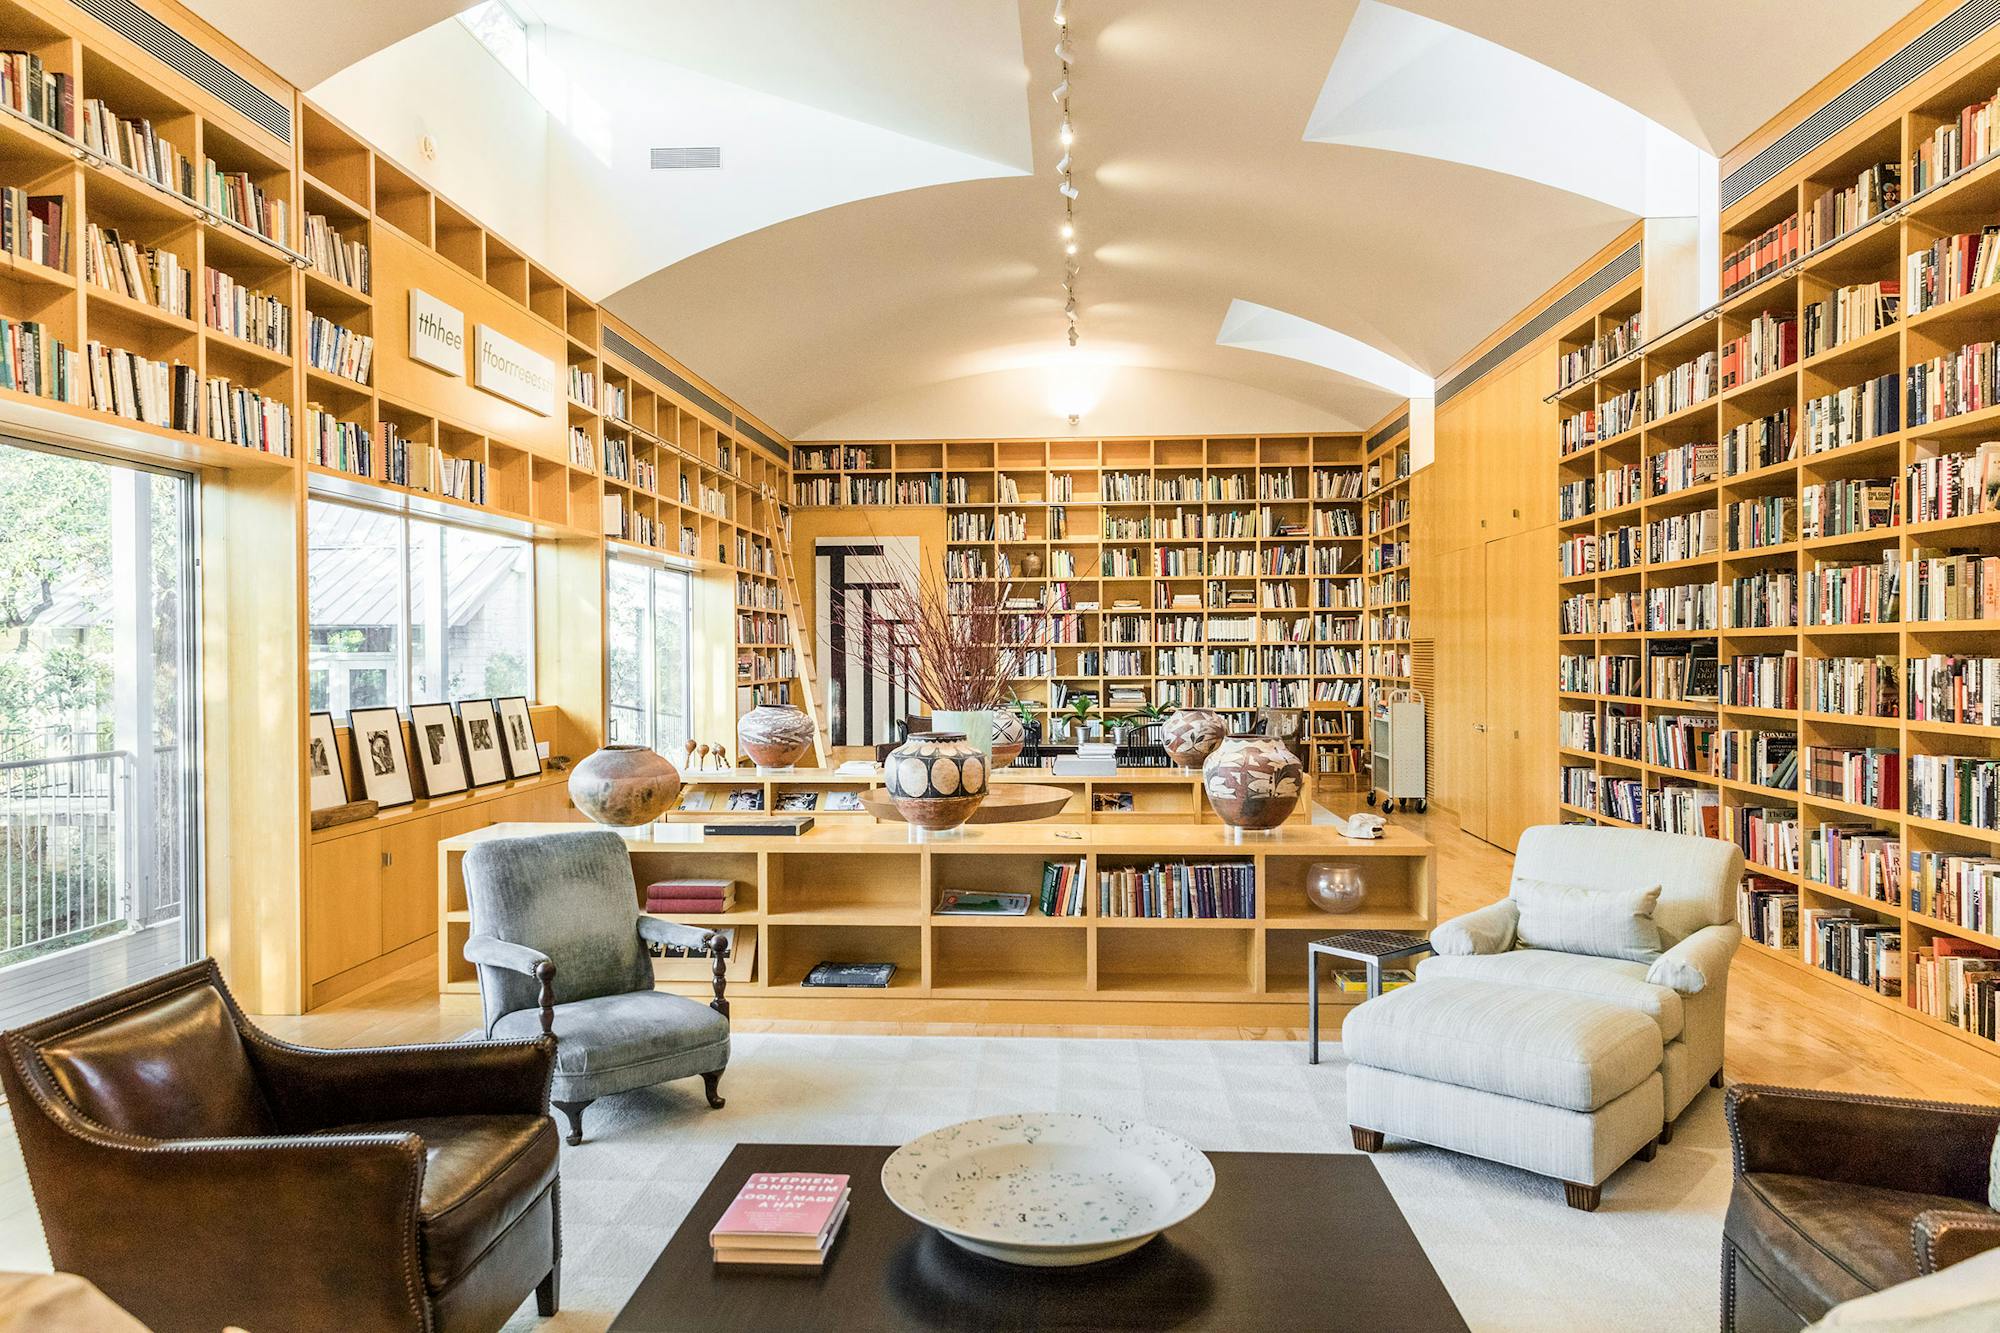 A Home Library Built for 10,000 (Or So) Books – Texas Monthly